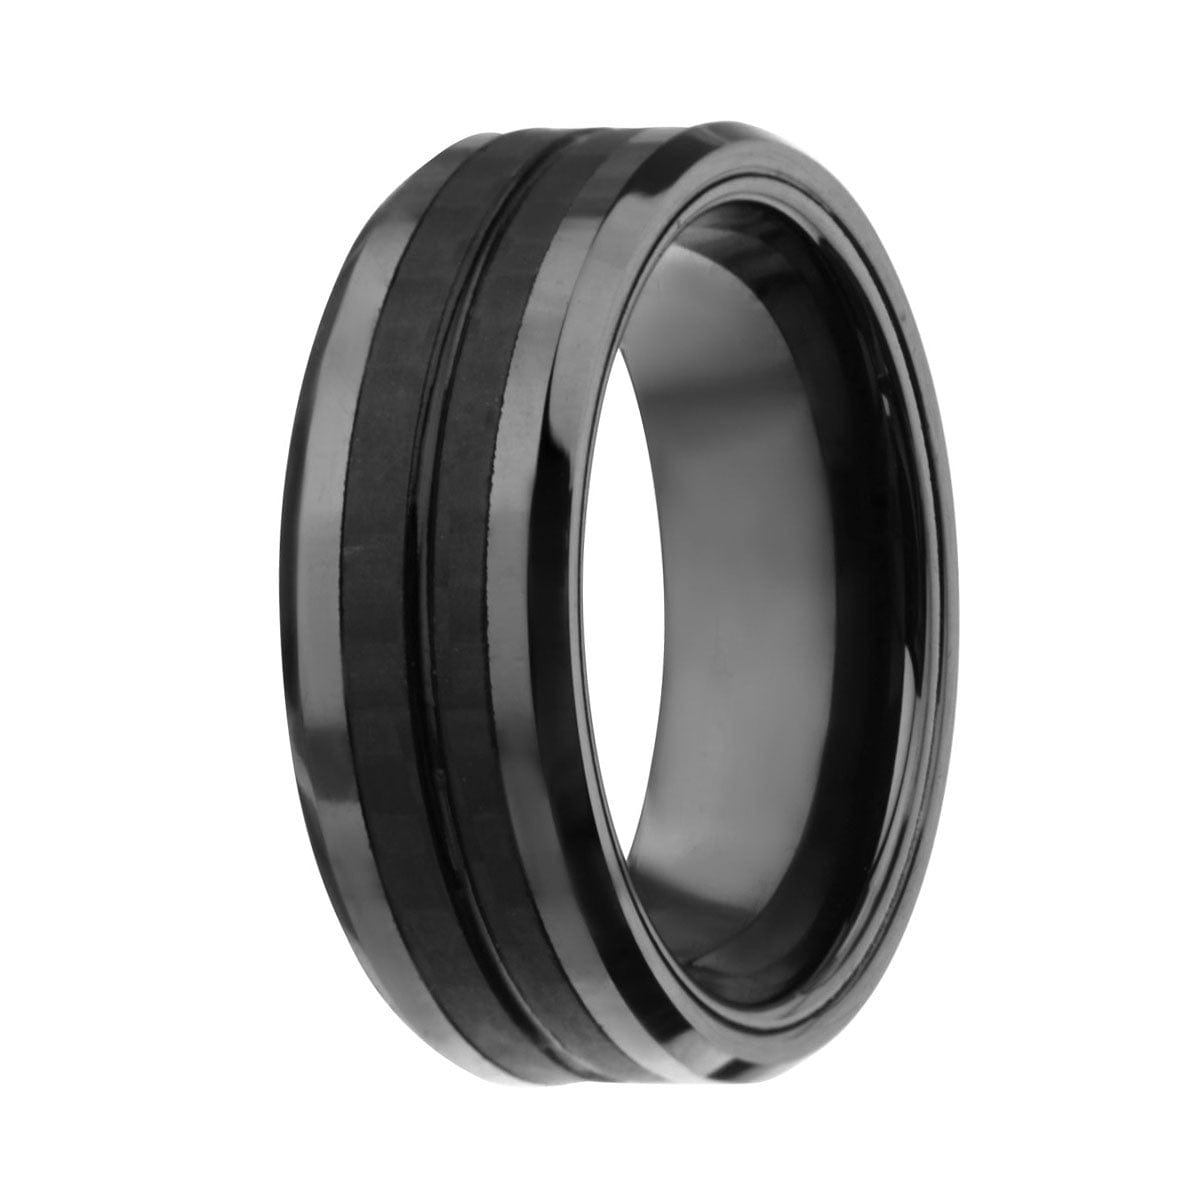 INOX JEWELRY Rings Black Stainless Steel Zero Gravity Collection Double Line Solid Carbon Fiber Band Ring